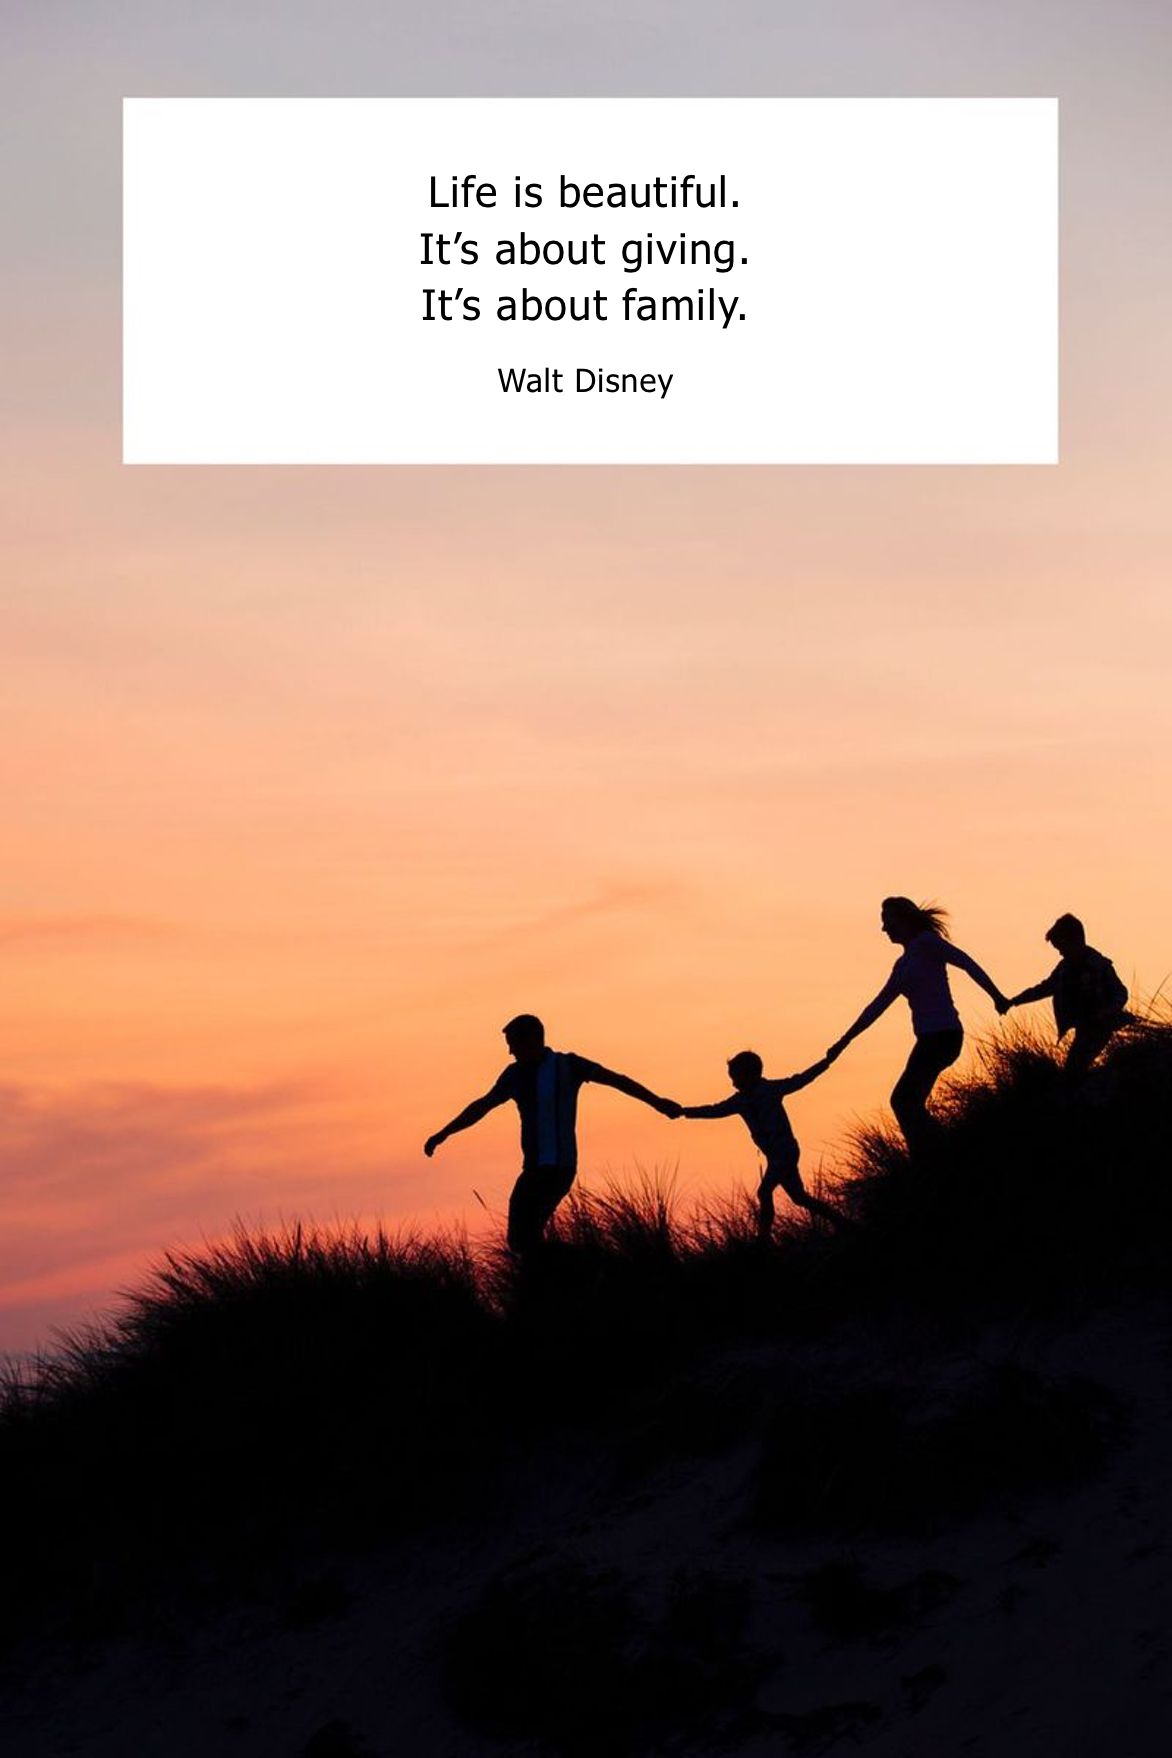 meaningful quotes about family